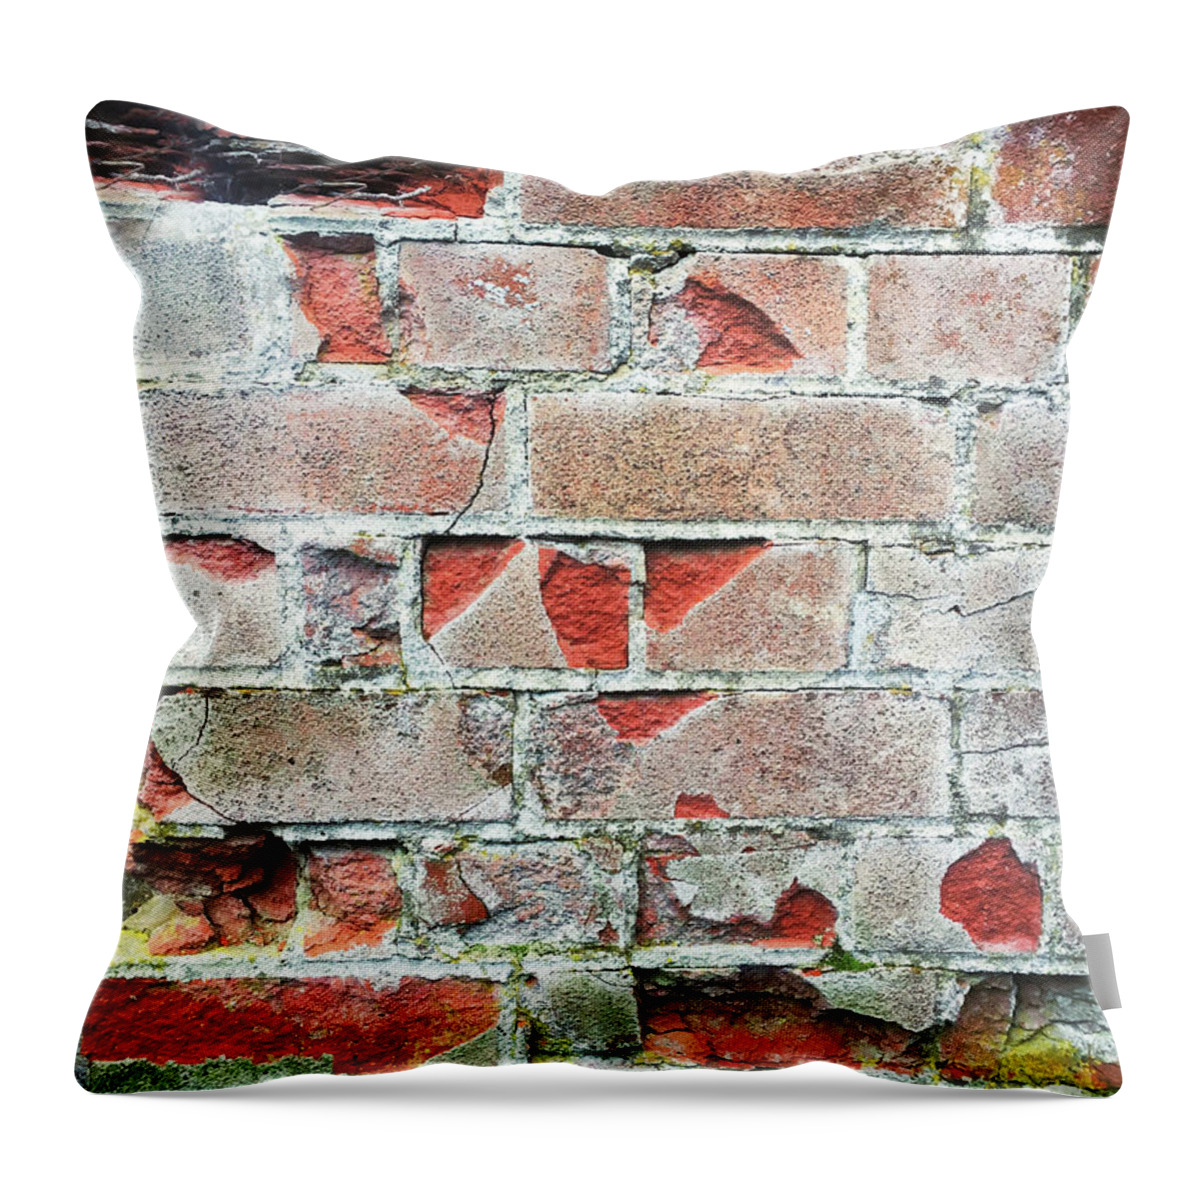 Abandoned Throw Pillow featuring the photograph Old brick wall by Tom Gowanlock